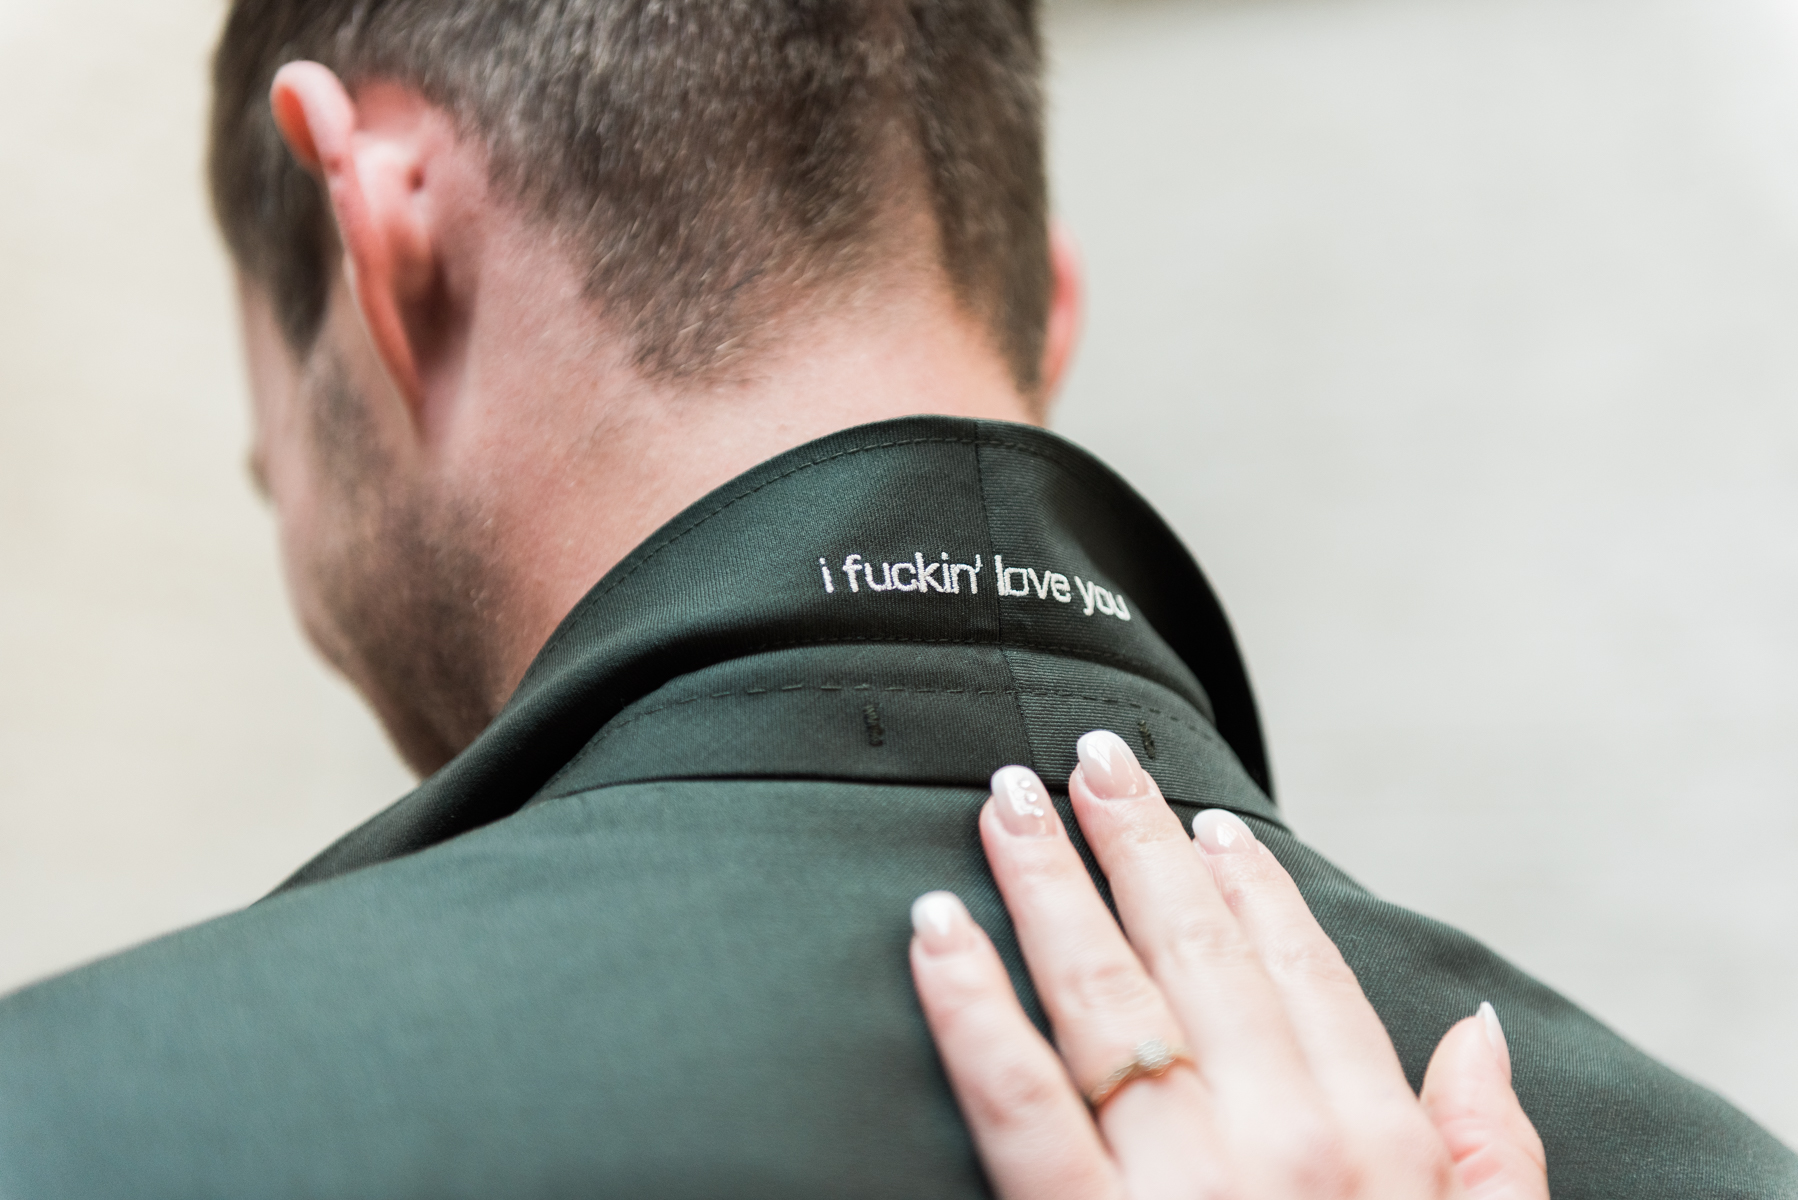 The text 'I fuckin' love you' embroiled in the collar of a groom's suit.